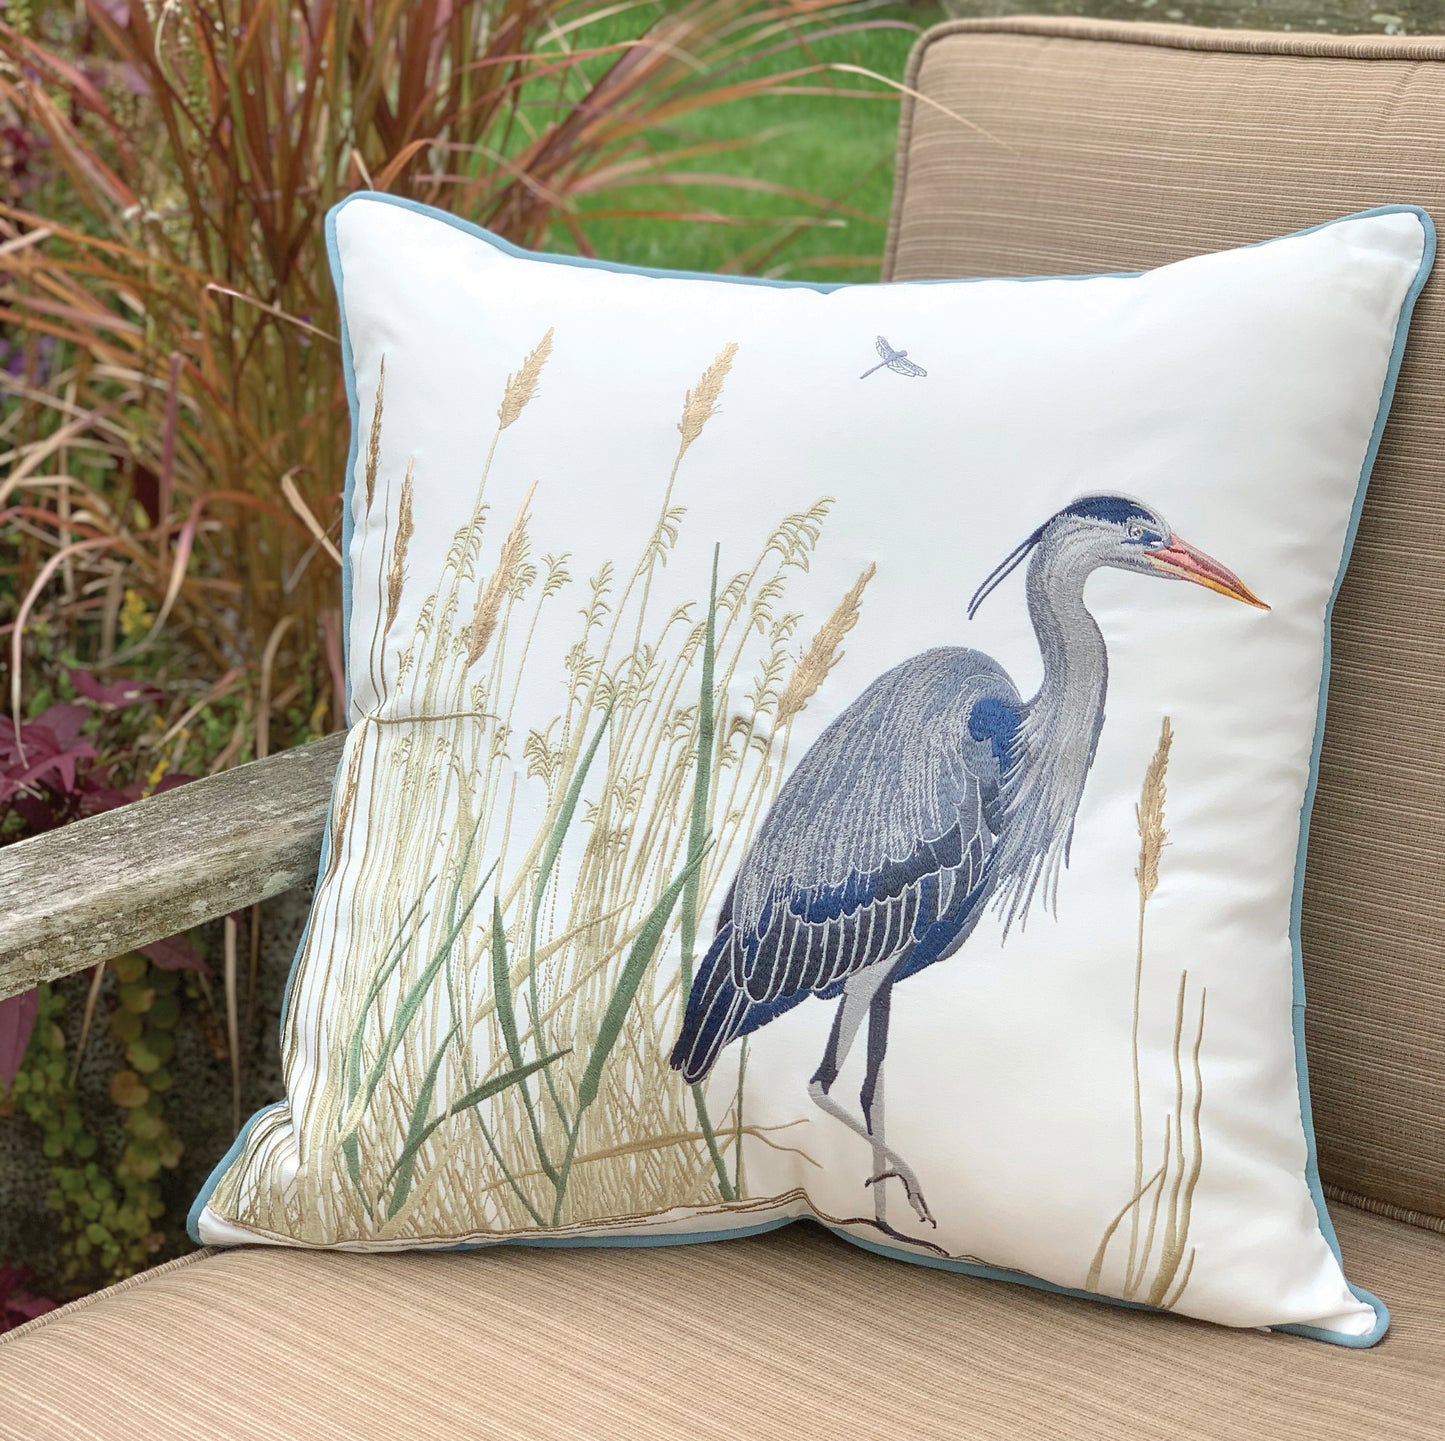 Blue Heron and Saltmarsh outdoor pillow styled on a patio chair.